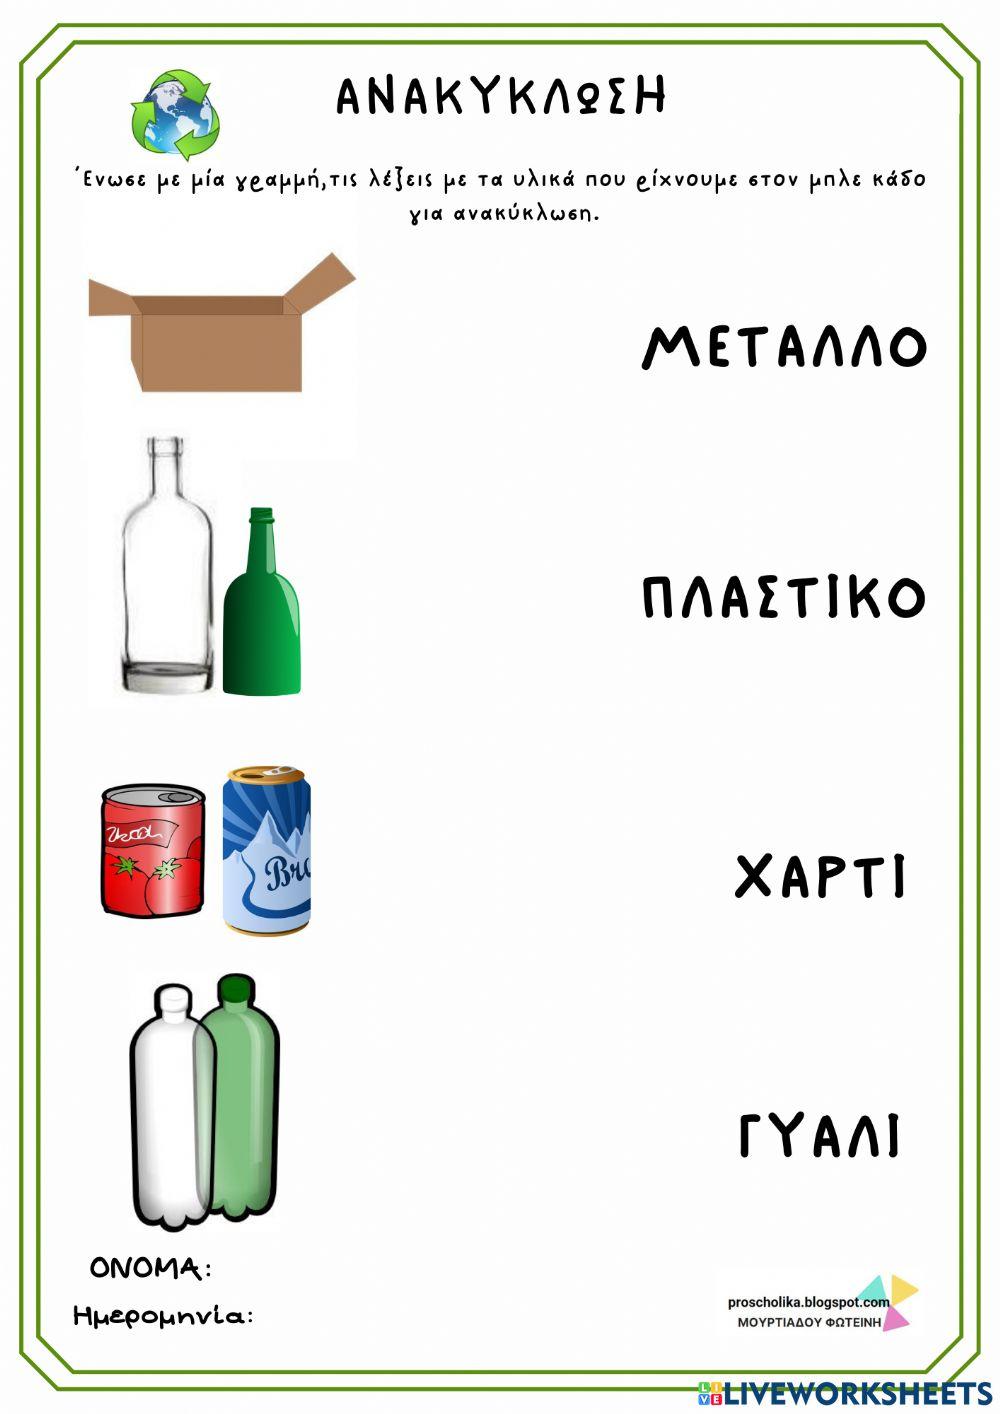 Recycling - ανακυκλωση